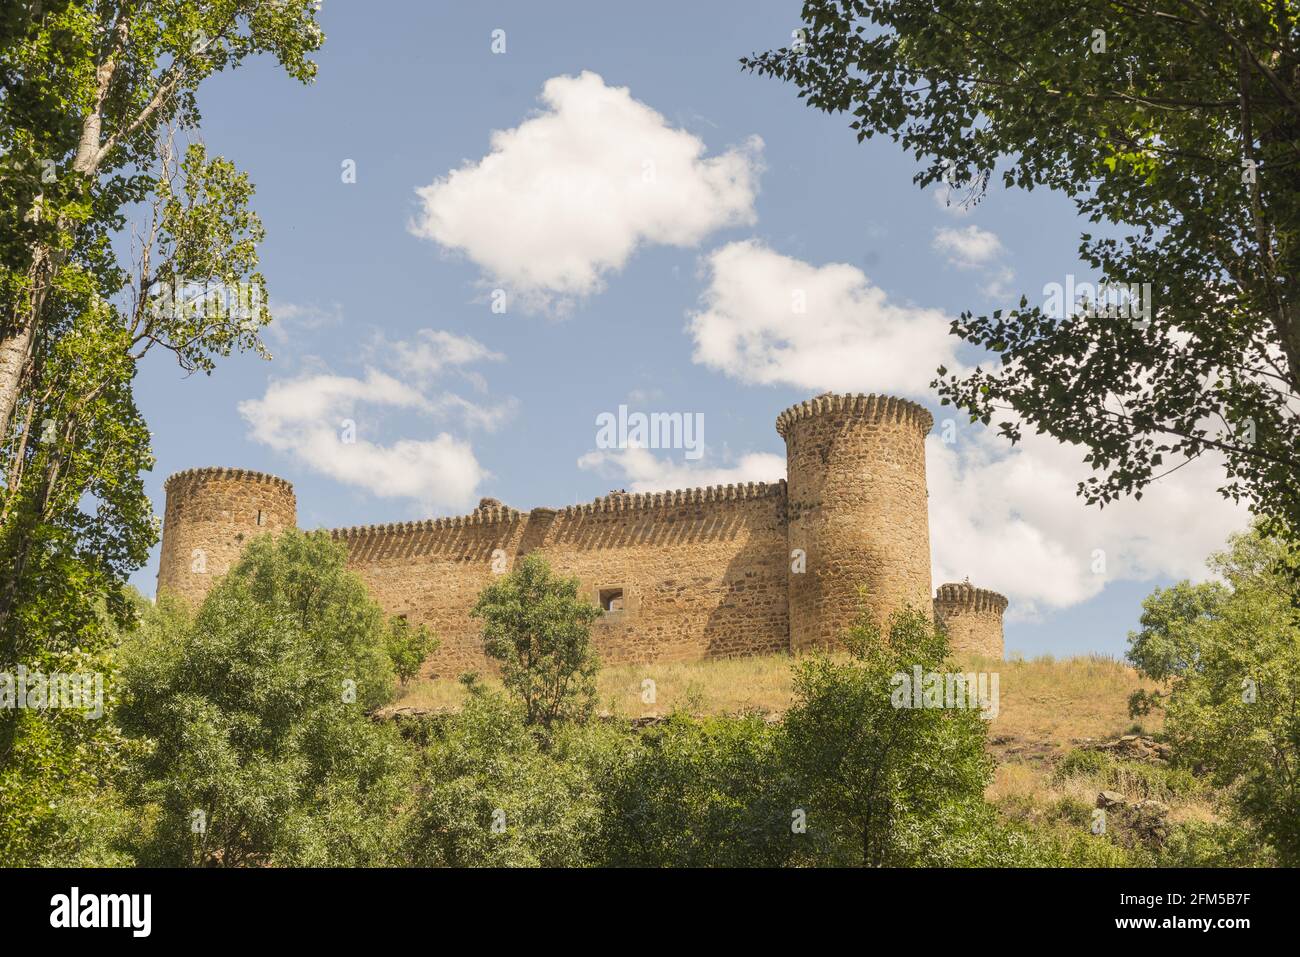 View of the Barco Avila Castilla la Mancha with trees in the foreground under a cloudy sky in Spain Stock Photo